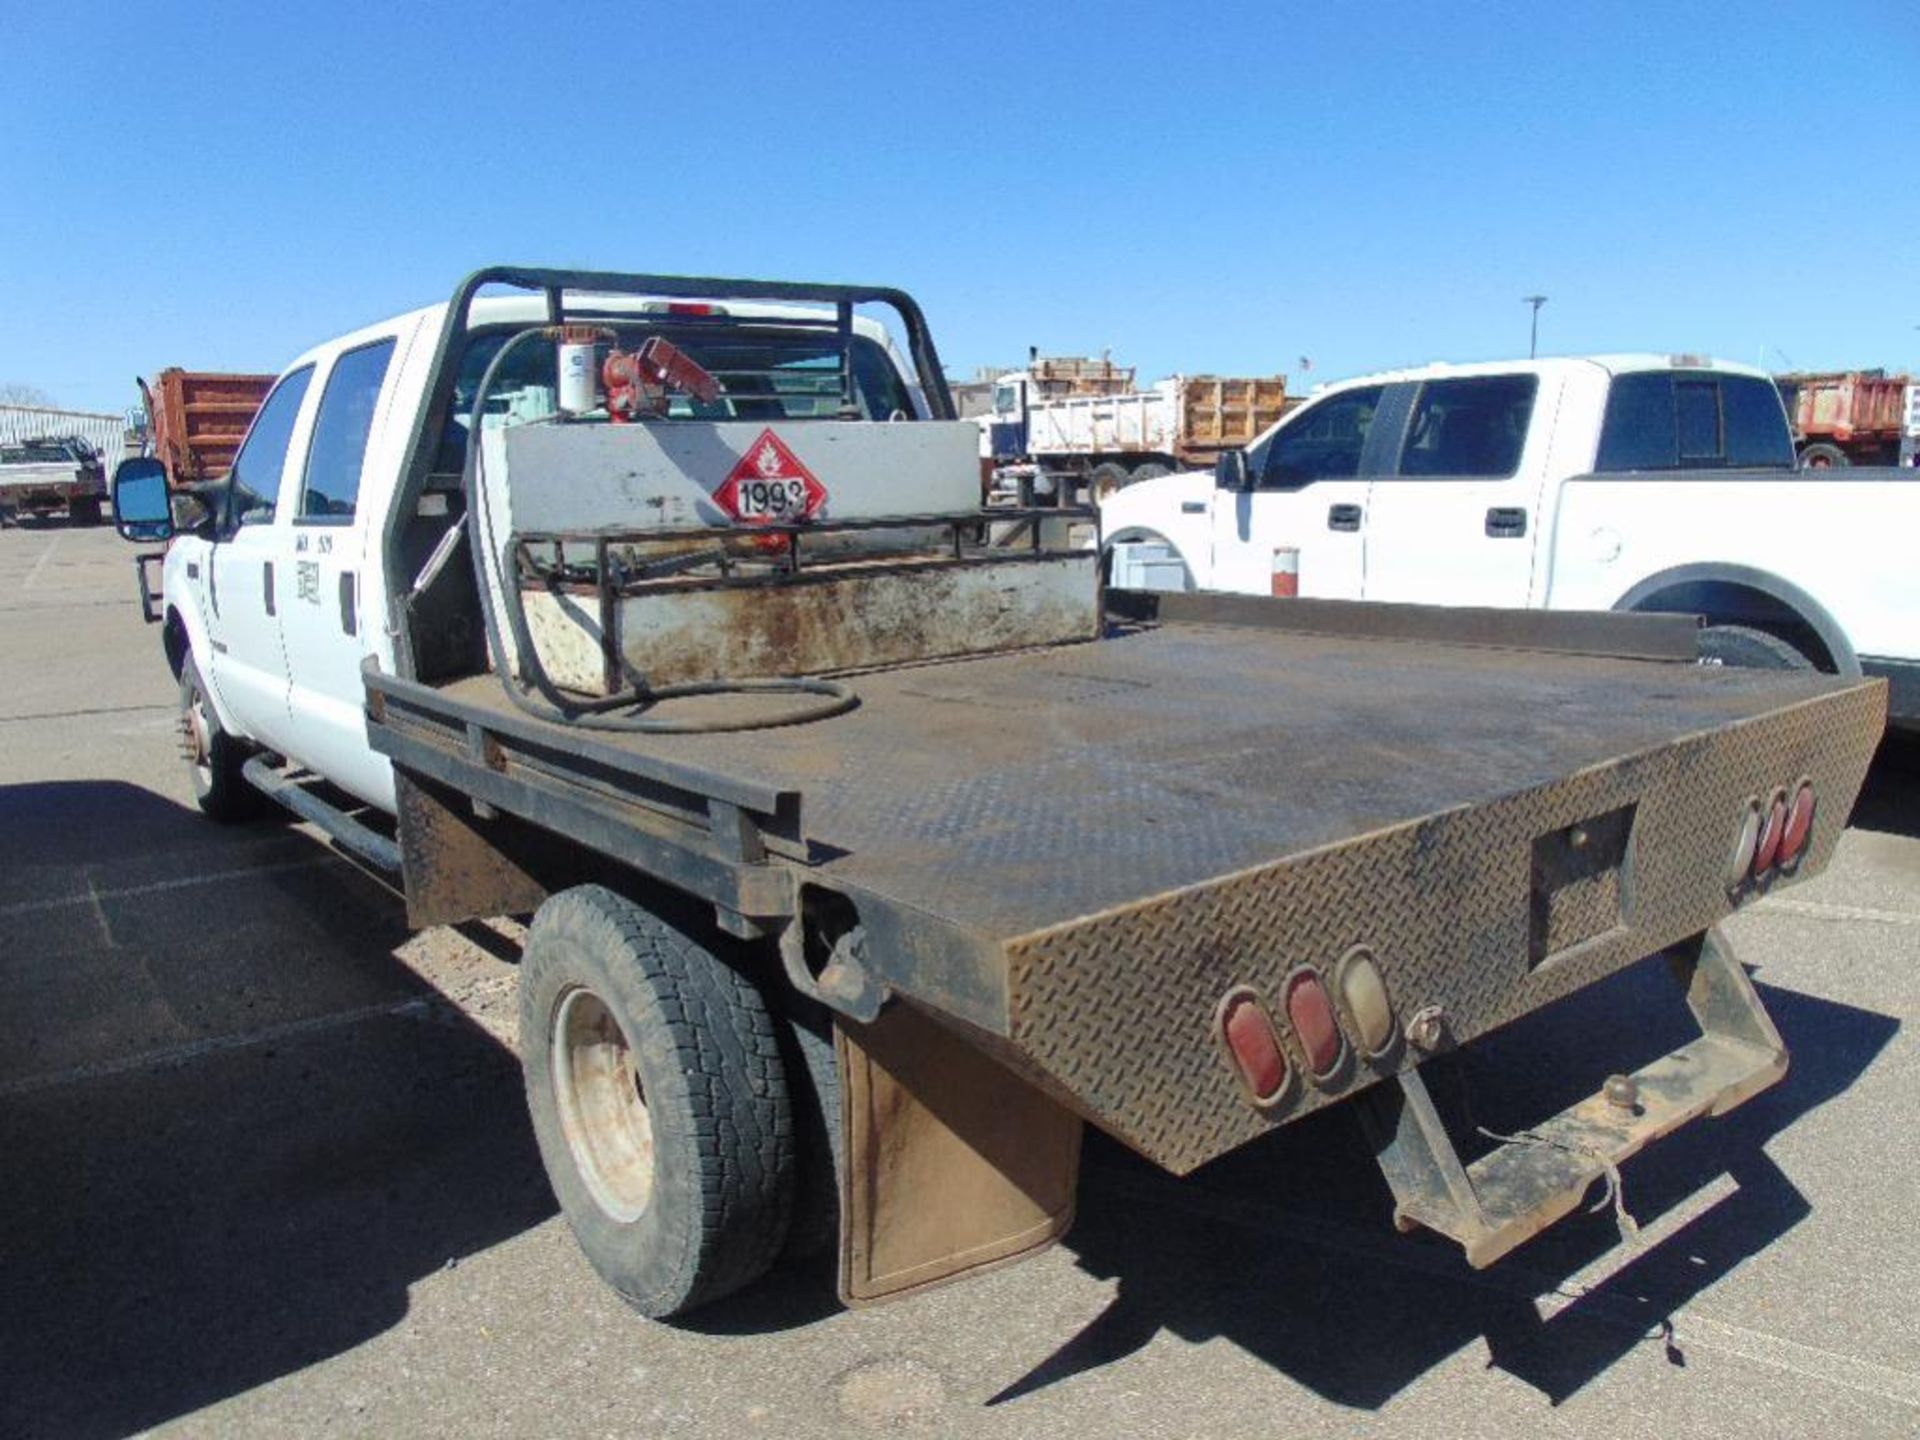 2003 Ford F350 4x4 Flatbed Truck s/n 1fdww37px3ed59792,6.0 pwr stroke, auto trans, hays flatbed, - Image 2 of 7